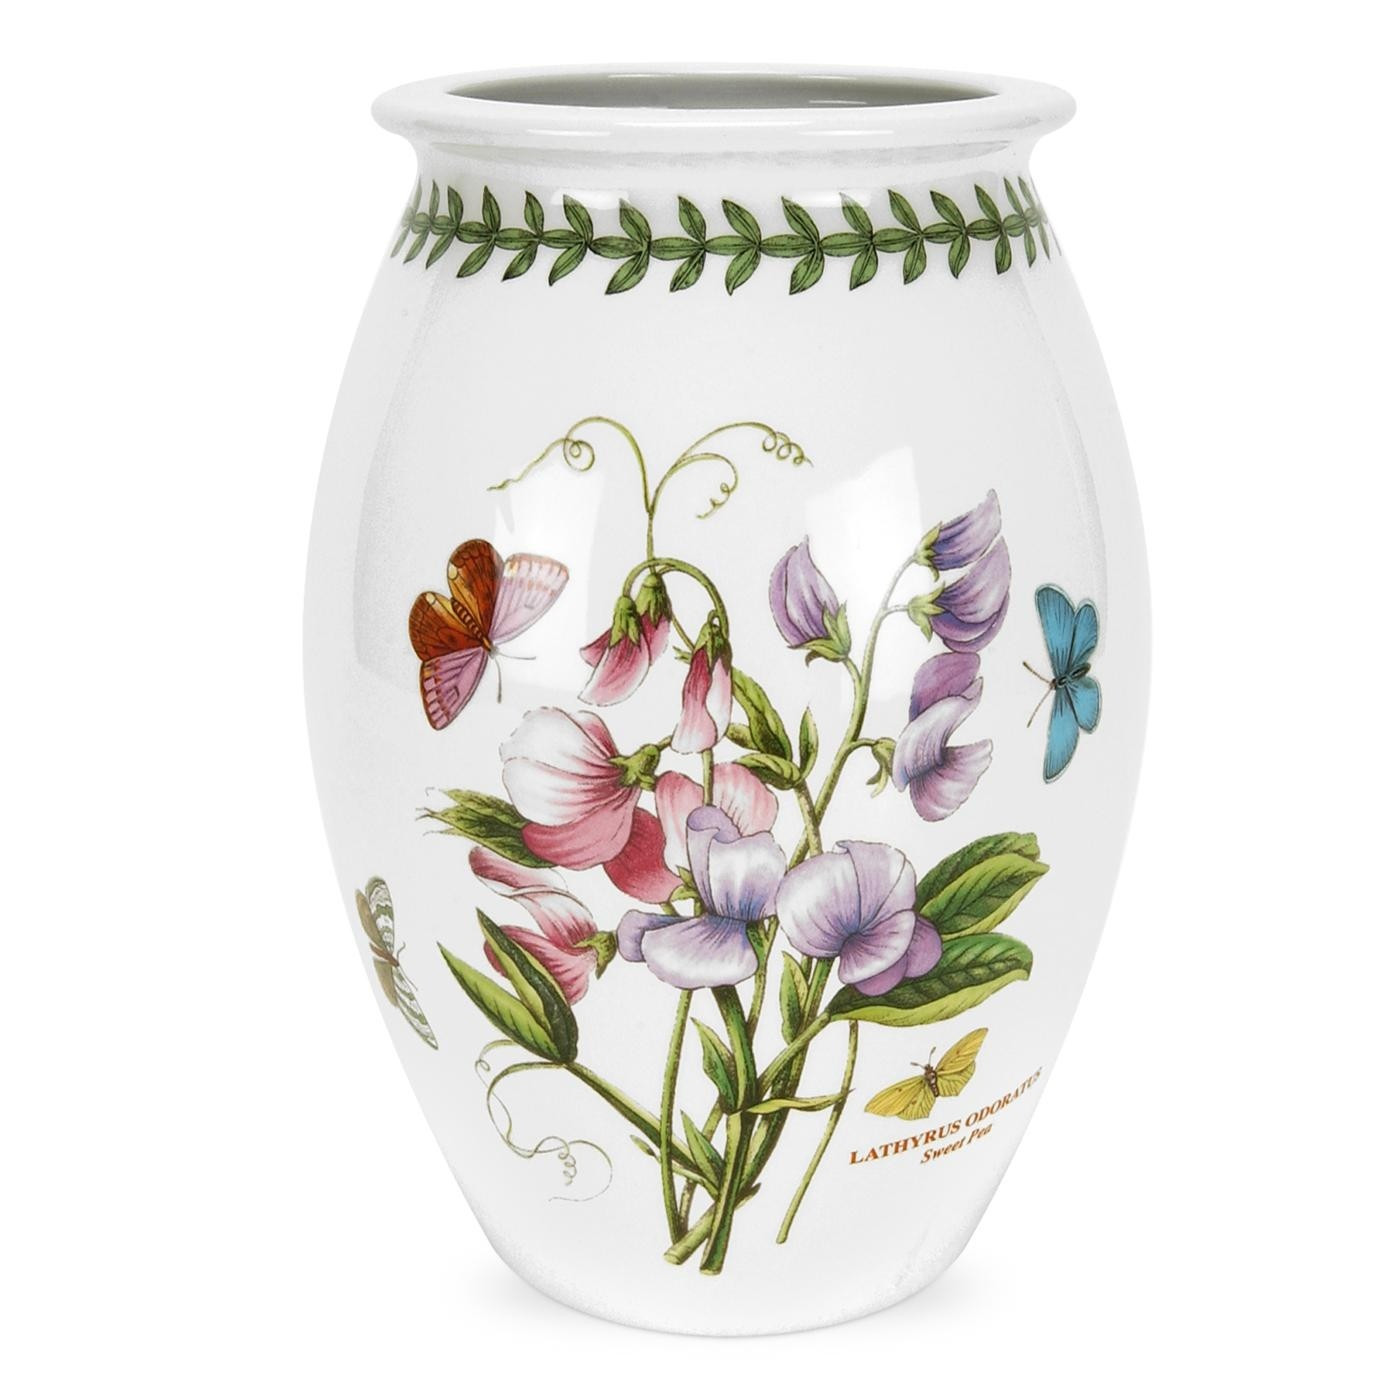 26 Great Large White Ceramic Vase 2024 free download large white ceramic vase of portmeirion botanic garden seconds 9 inch sovereign vase large no with regard to portmeirion botanic garden seconds 9 inch sovereign vase large no guarantee of fl